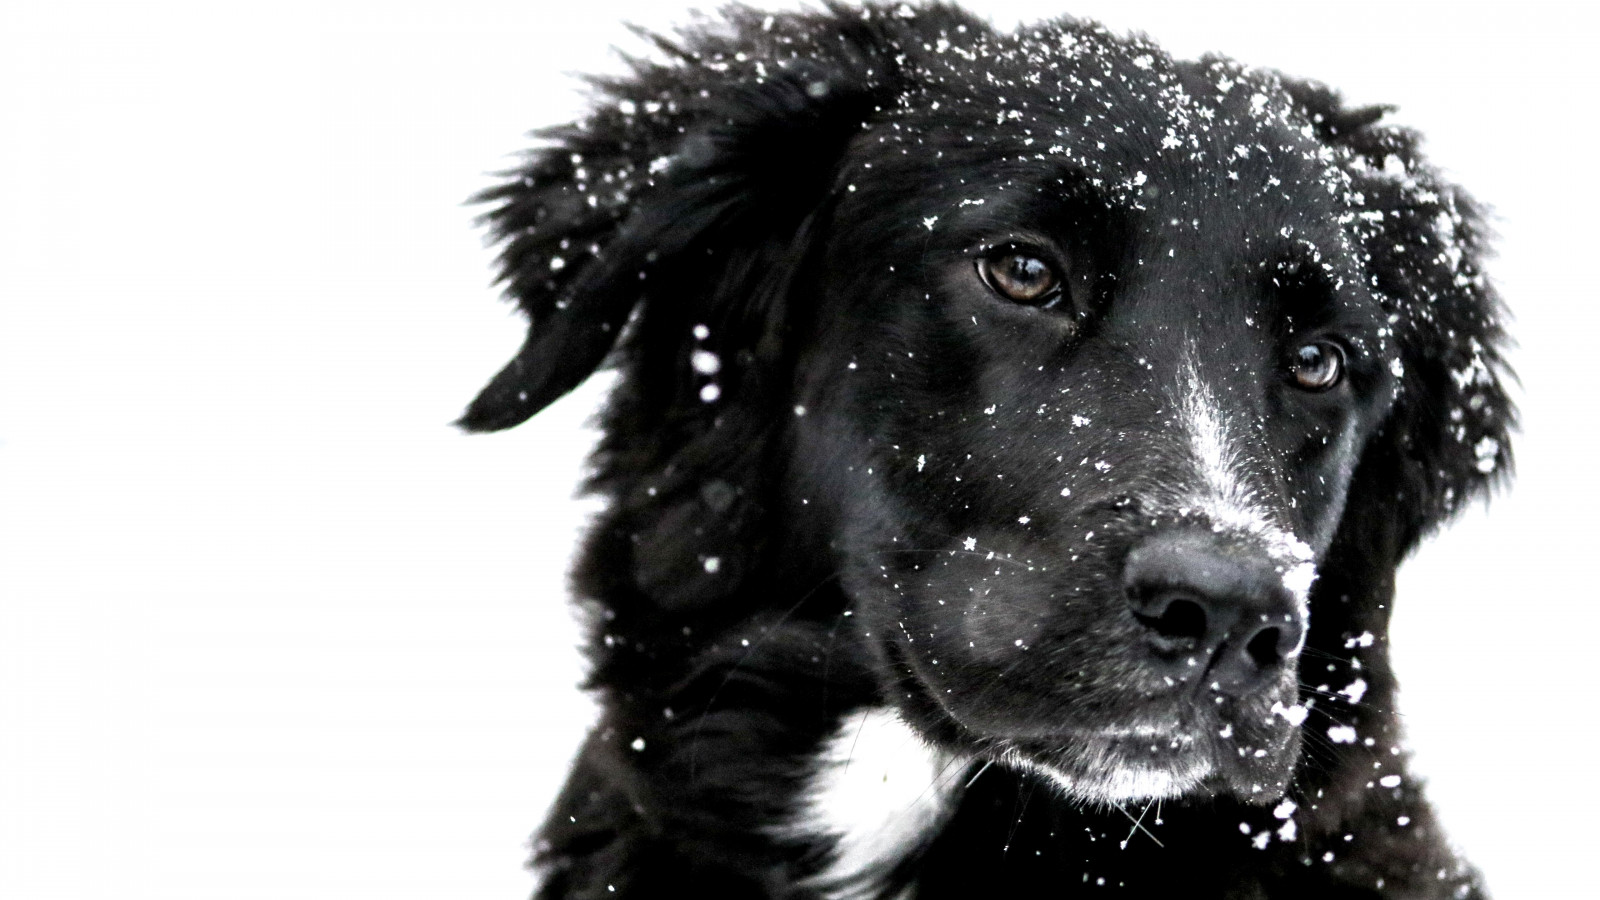 Snowing over the cute dog wallpaper 1600x900